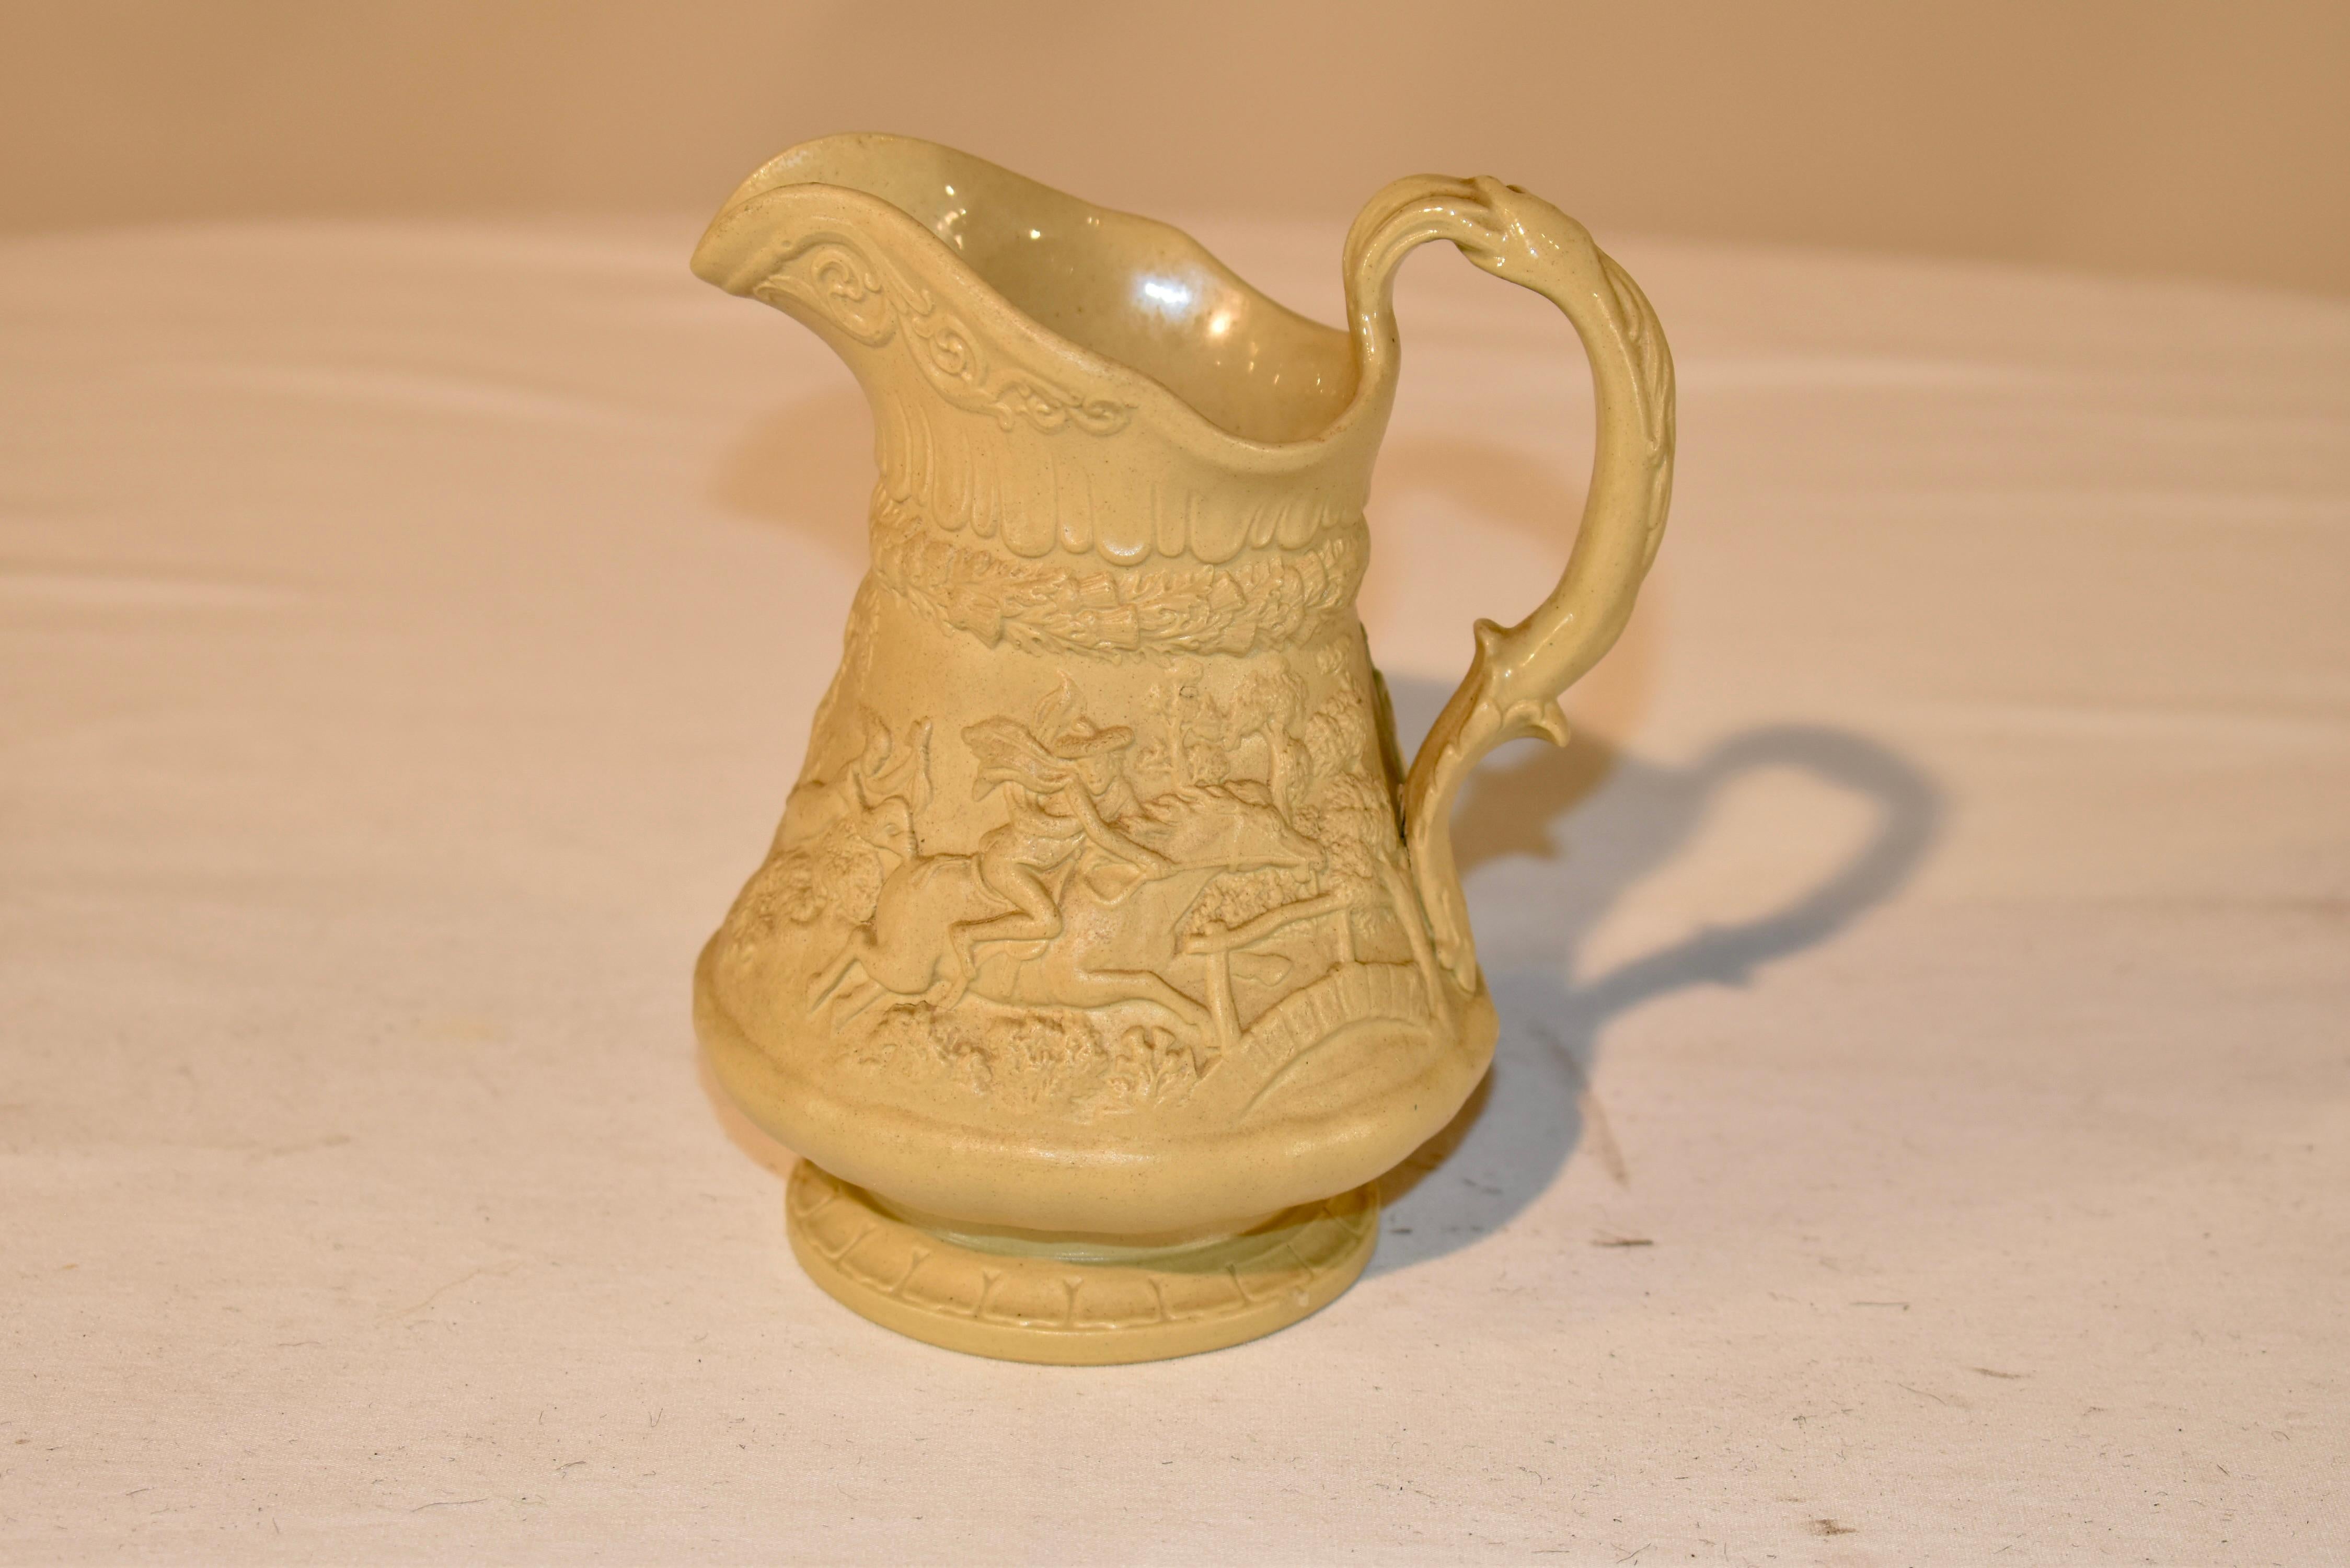 Splendid W. Ridgway & Co. drab ware pitcher which is dated on the bottom with an impressed mark October 1, 1835. This pitcher is in a pattern depicting a village scene including a pub and a horse race outside. The handle is exquisitely molded and